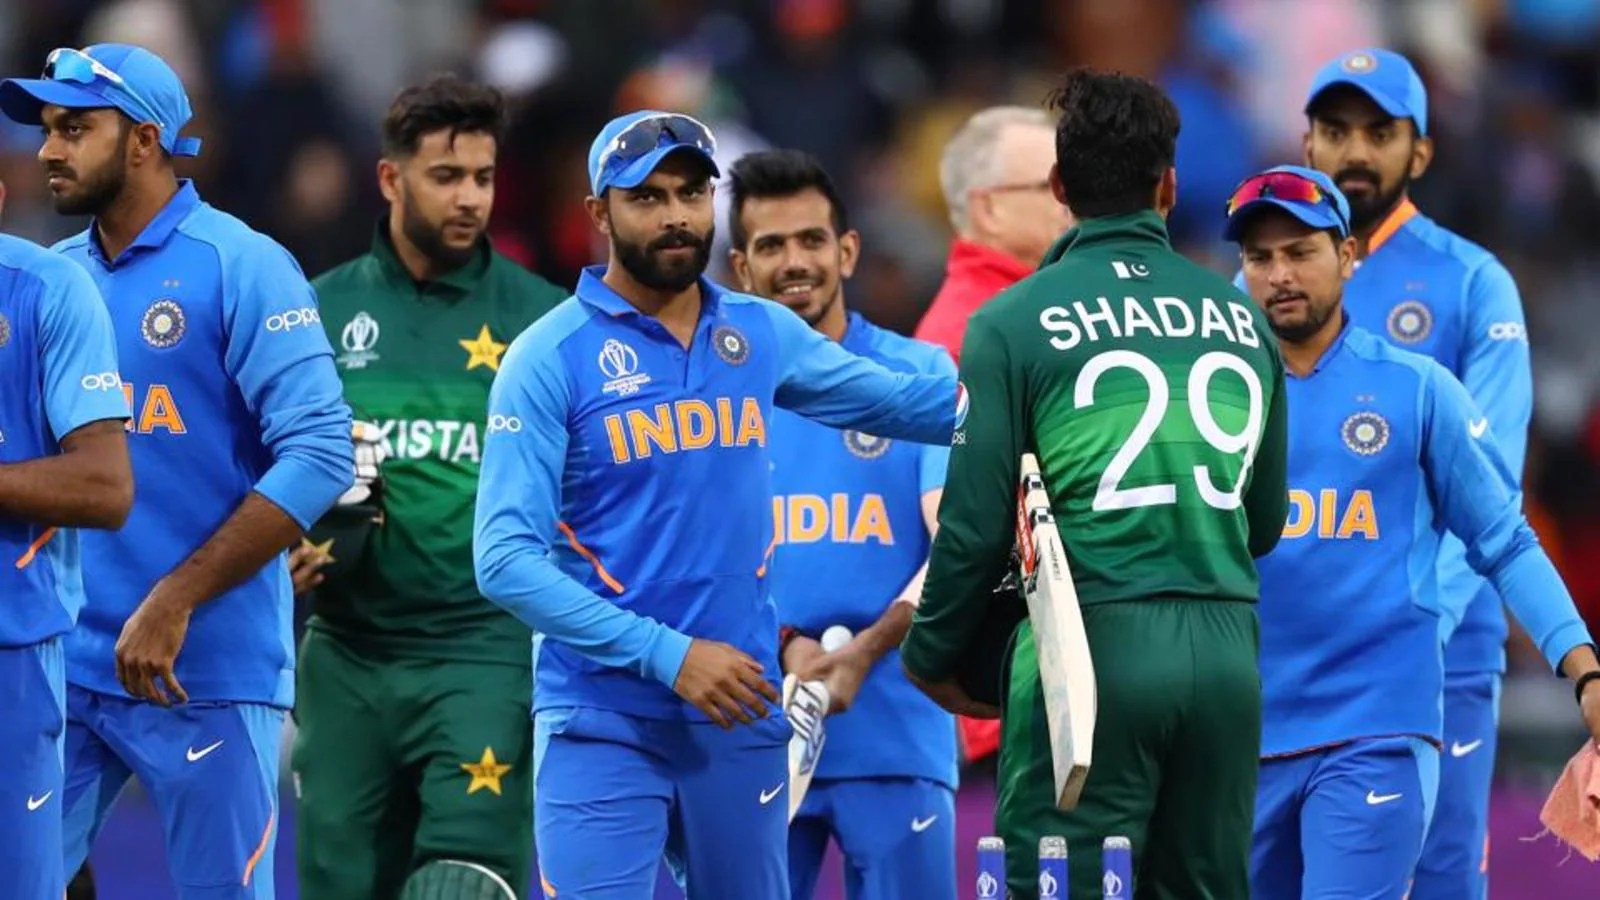 ASIA Cup T20 Cricket: All you want to know Asia Cup 2022 full schedule, India vs Pakistan match details, match timings, UAE pitch reports, match timing and ASIA CUP live streaming details